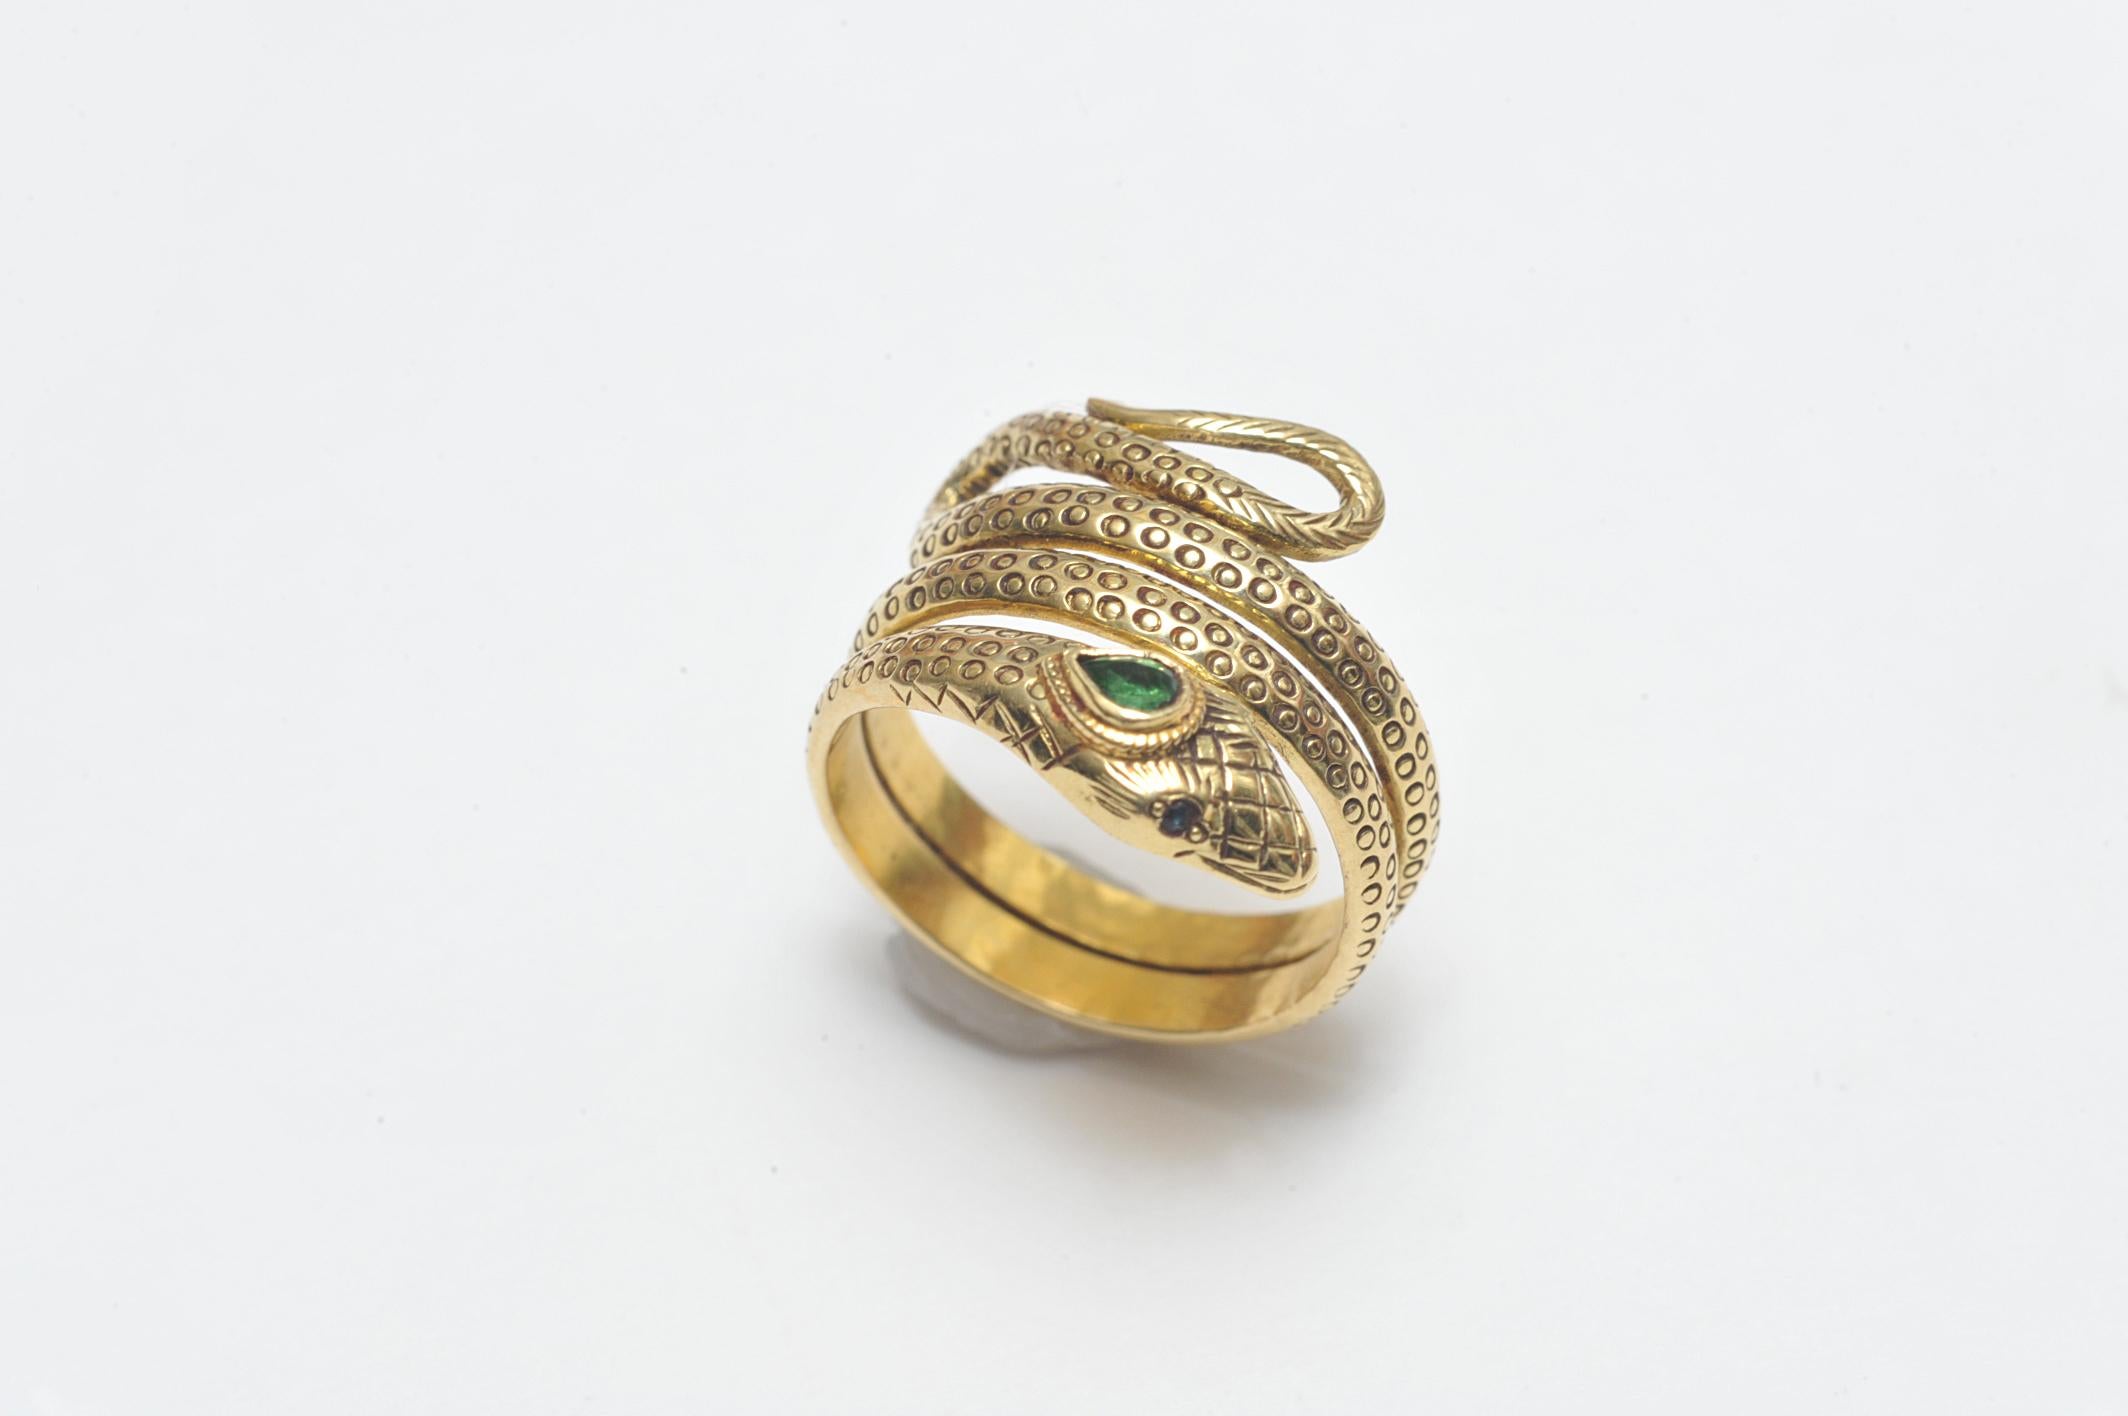 A coiled, 18K gold snake ring with hand-tooled 'scales' along the body and at the head of the snake.  Set with a faceted, pear-shaped emerald third eye and faceted blue sapphire eyes.  A size 7 as it is, but has the capacity to be reshaped.